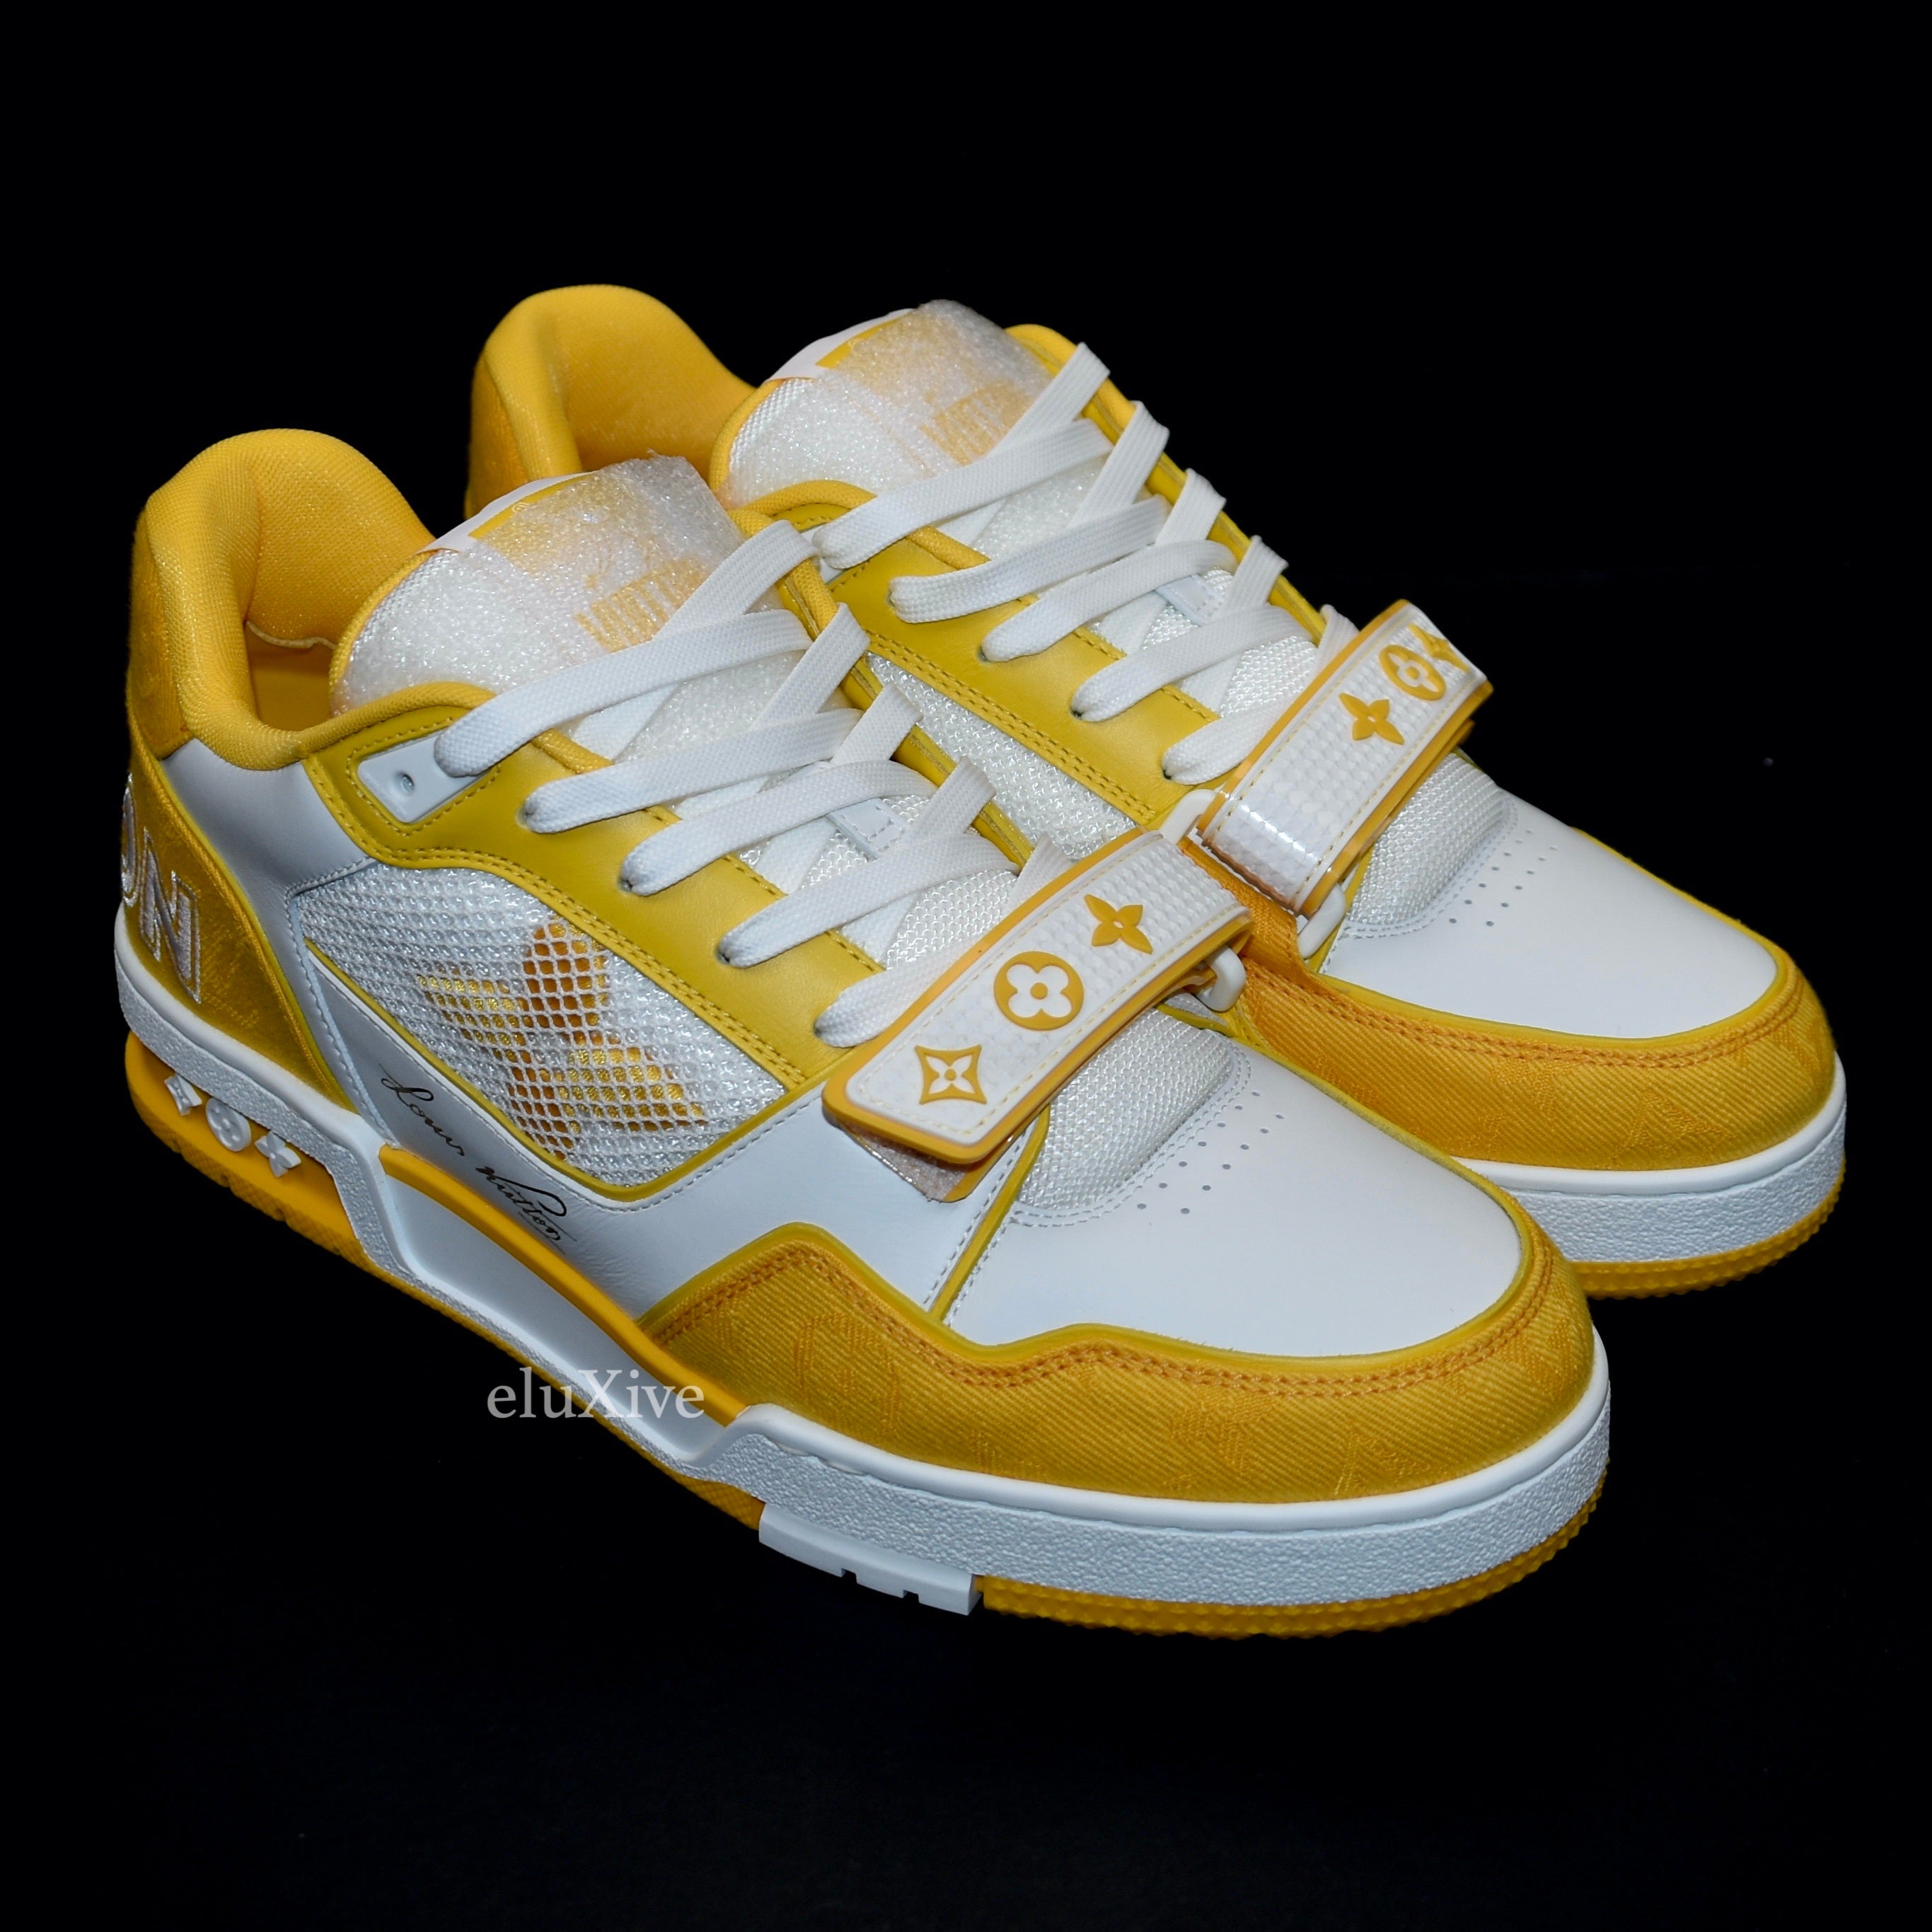 Louis Vuitton Trainer “ Yellow “ This version of the LV Trainer